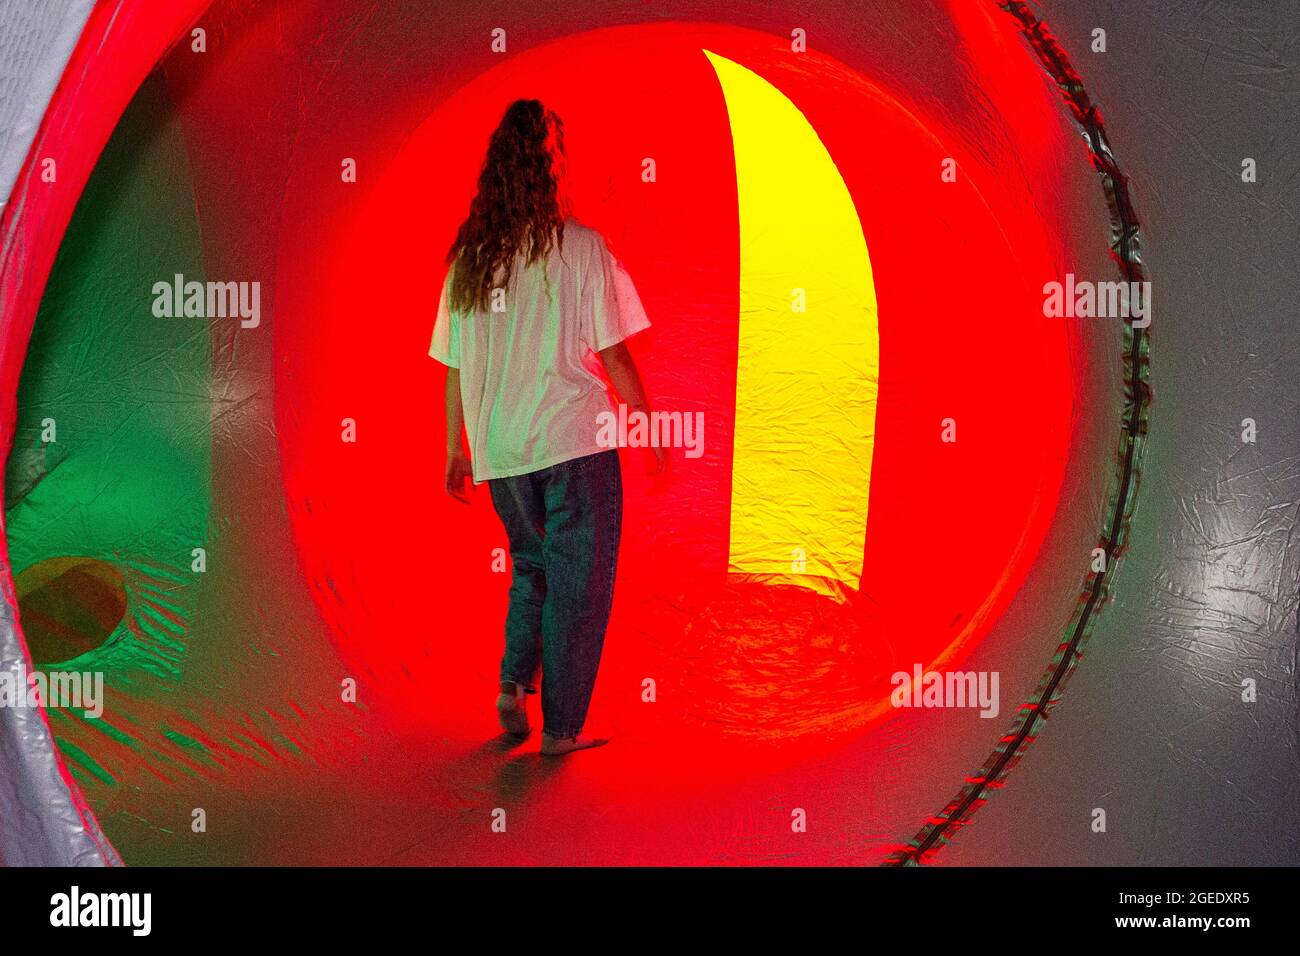 Blackburn, Lancashire, UK. 19th Aug 2021.  Zoe Felix explores the changing patterns of light, shifting as they pass through labyrinthine passages, Dodecalis Luminarium provides moments of pause in meditative stillness and quiet wonder in the furthest corners of the precision-engineered, ‘hide and seek’ illuminated colour tunnels of light architecture. Credit: MediaWorldImages/Alamy Live News Stock Photo